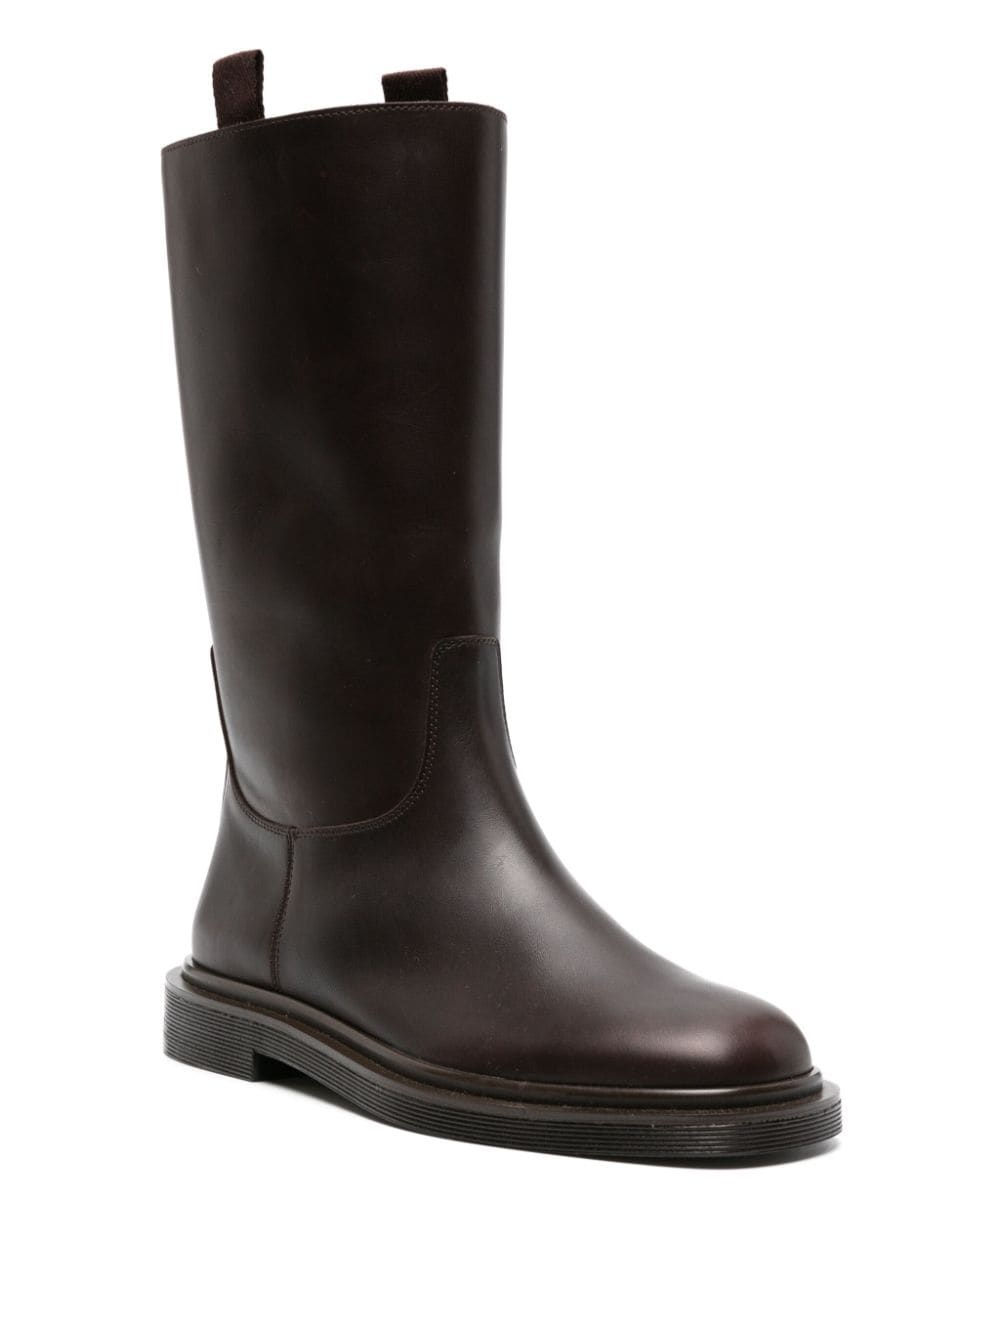 Ranger Tubo leather boots - 2